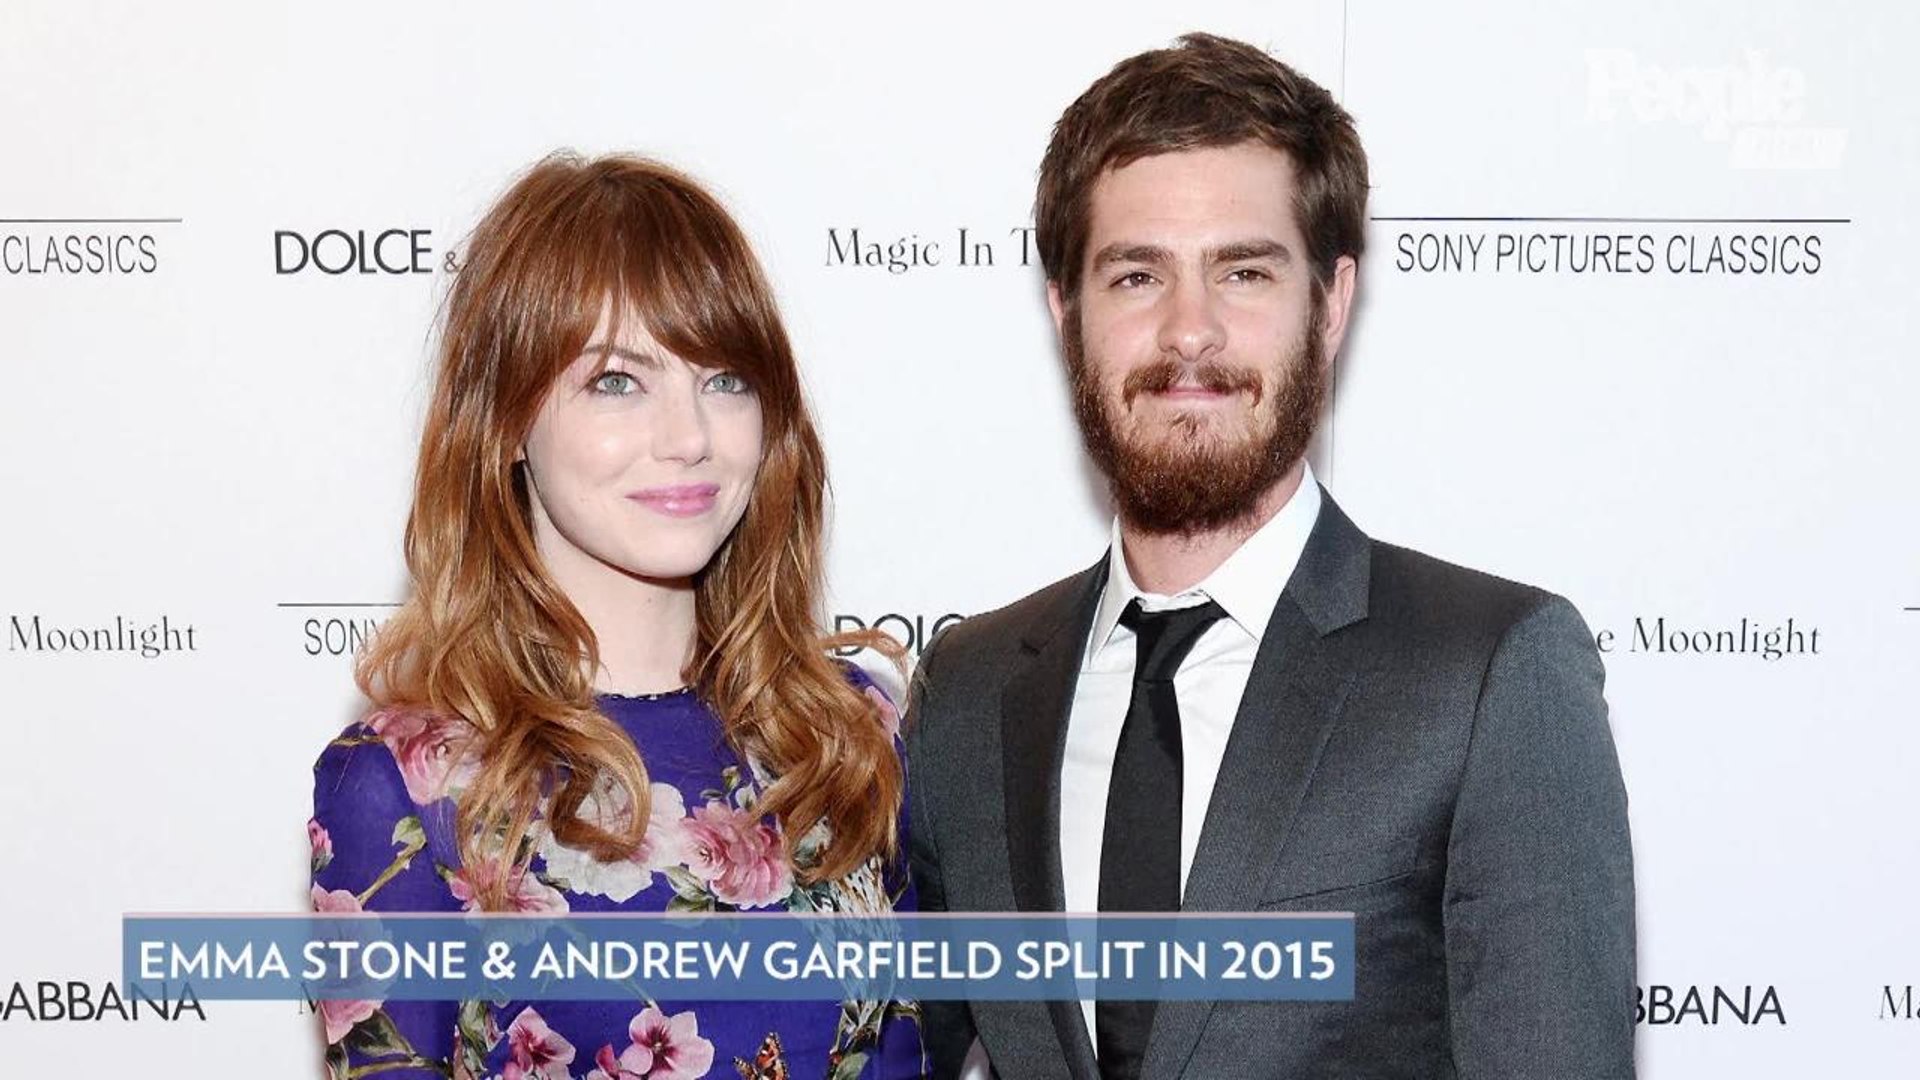 Dave McCary proposed to Emma Stone in an 'SNL' office